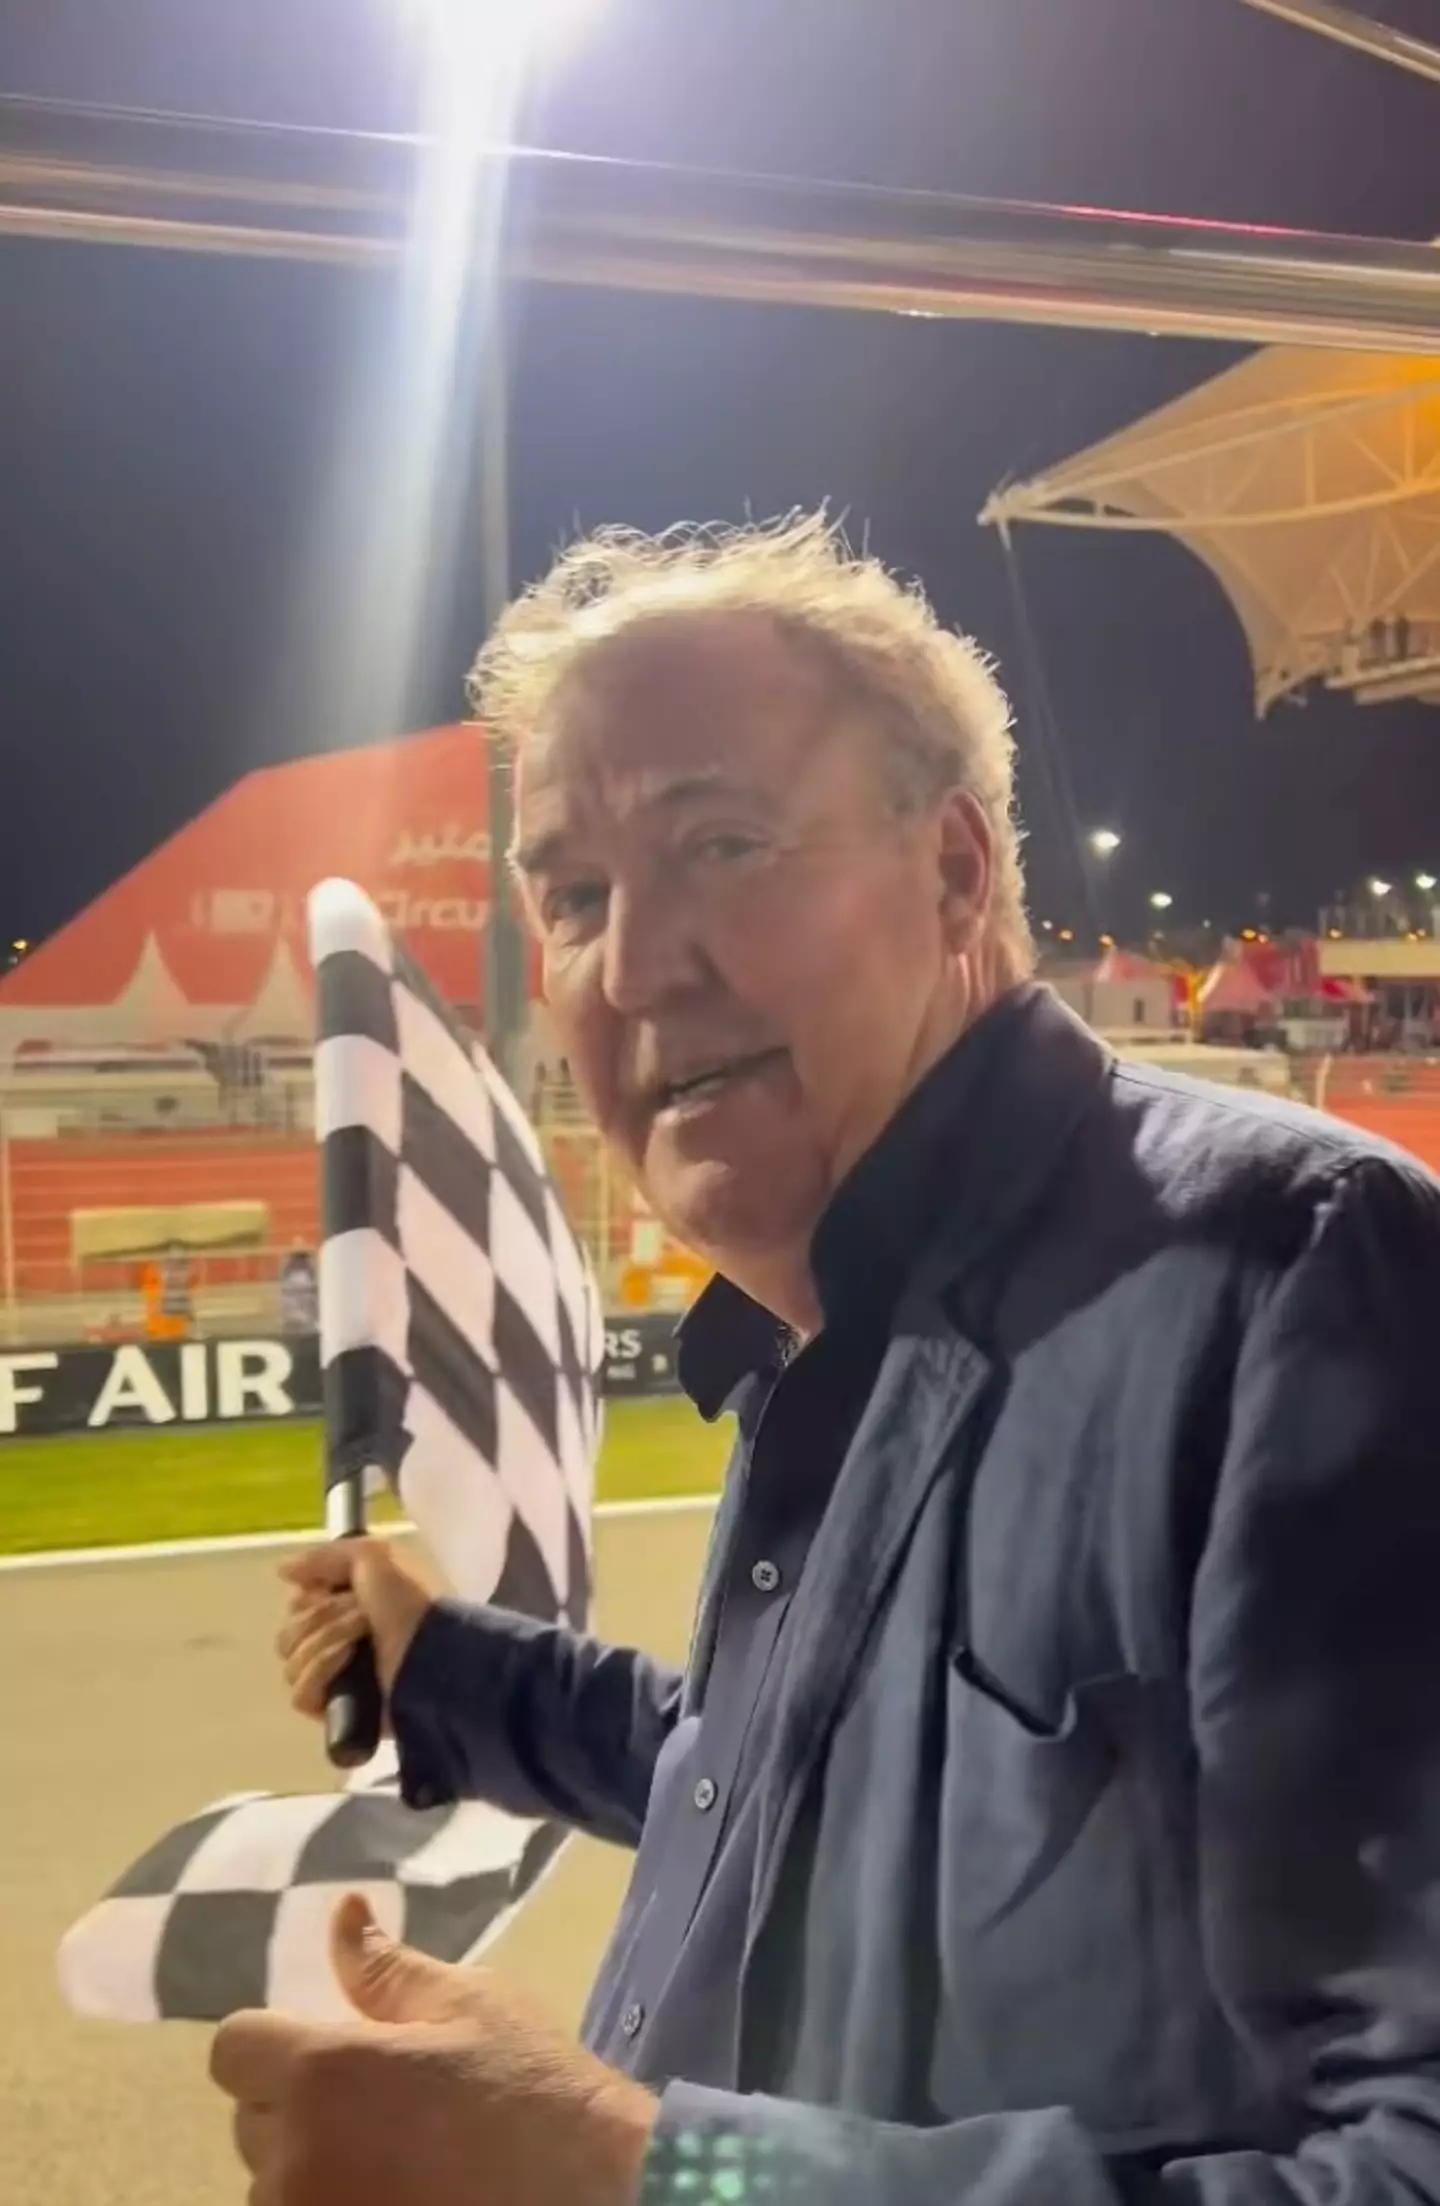 Jeremy Clarkson waved the black and white chequered flag at the F1.